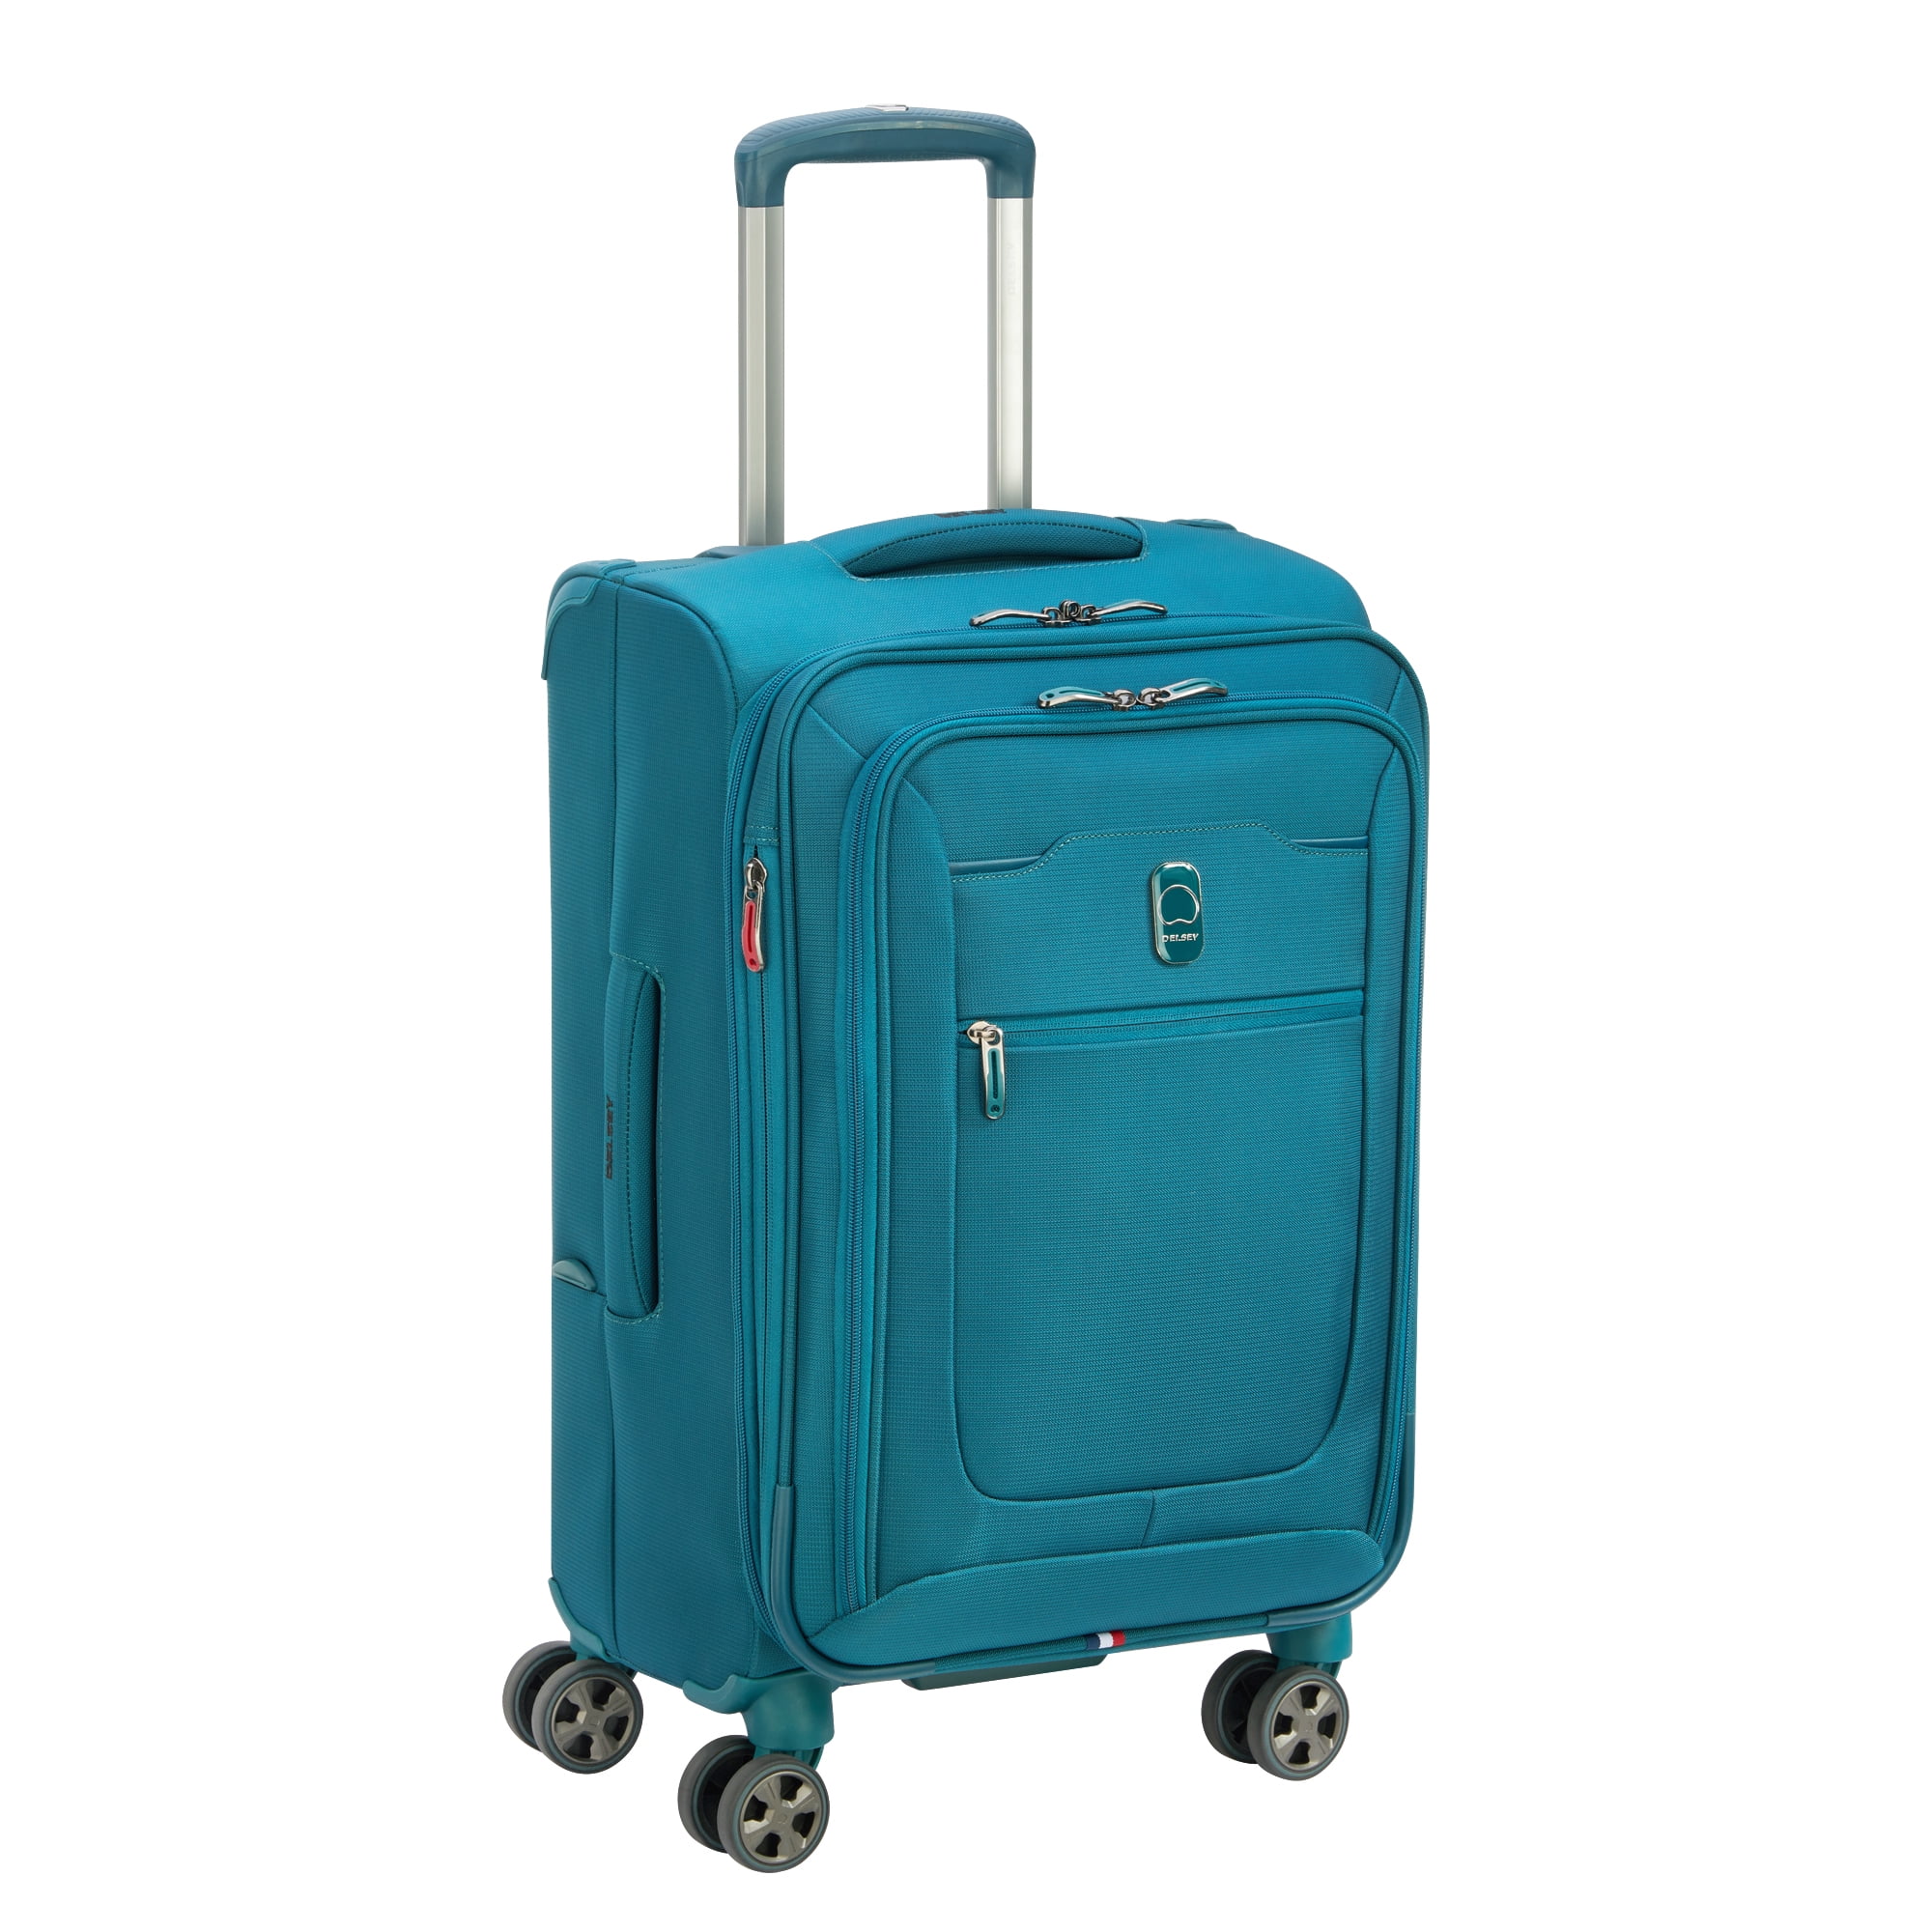 DELSEY Paris Luggage Hyperglide Expandable Spinner 